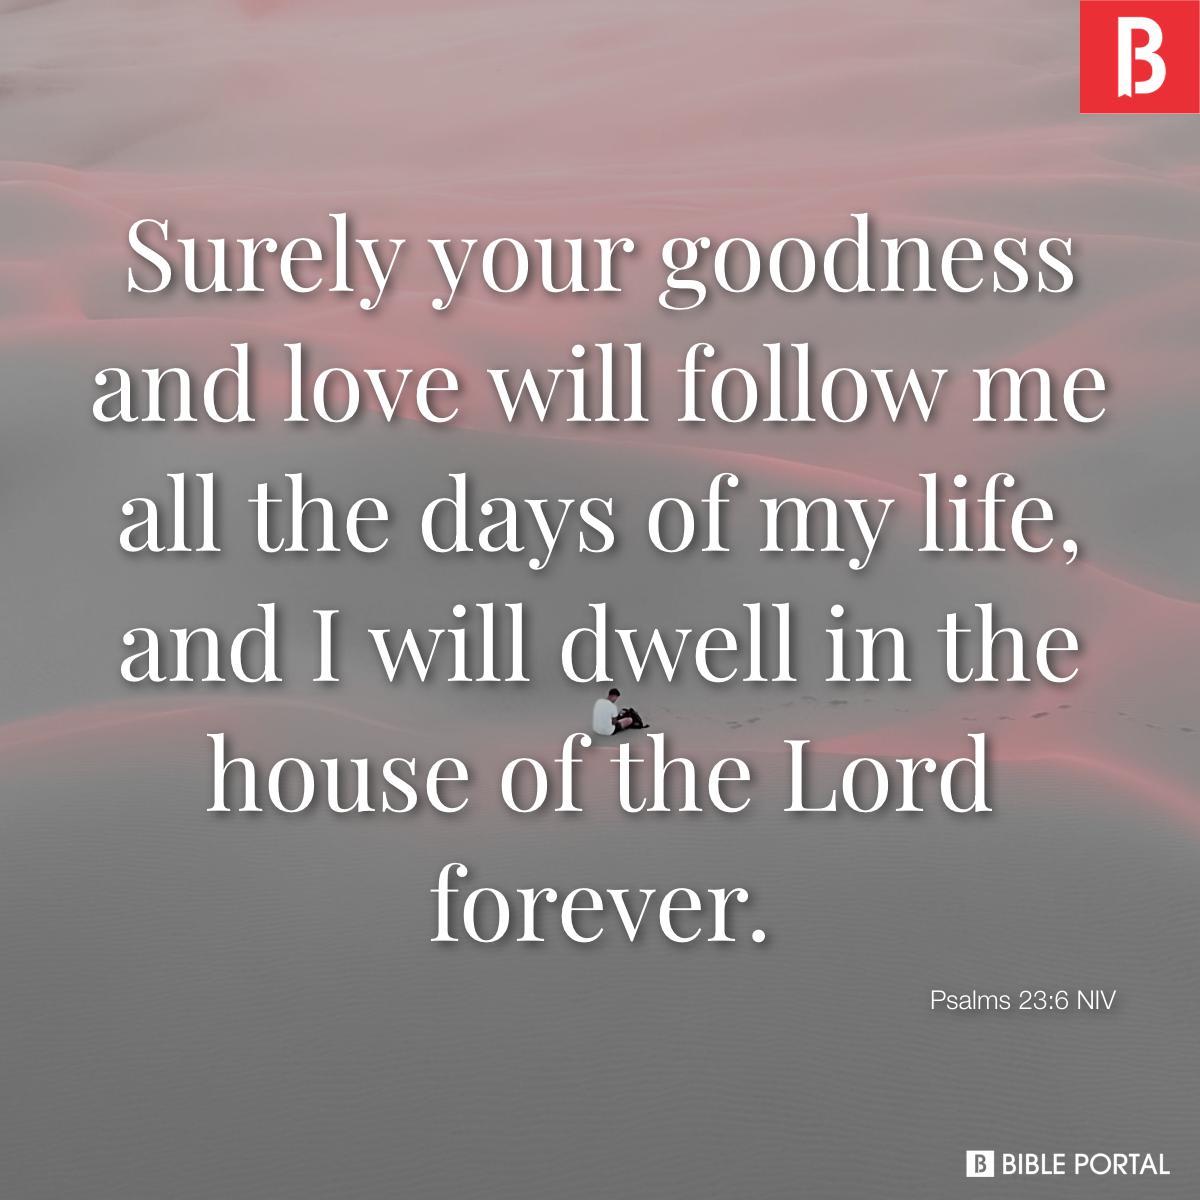 Bible verse of the day - January 24, 2023 - Psalm 23:6